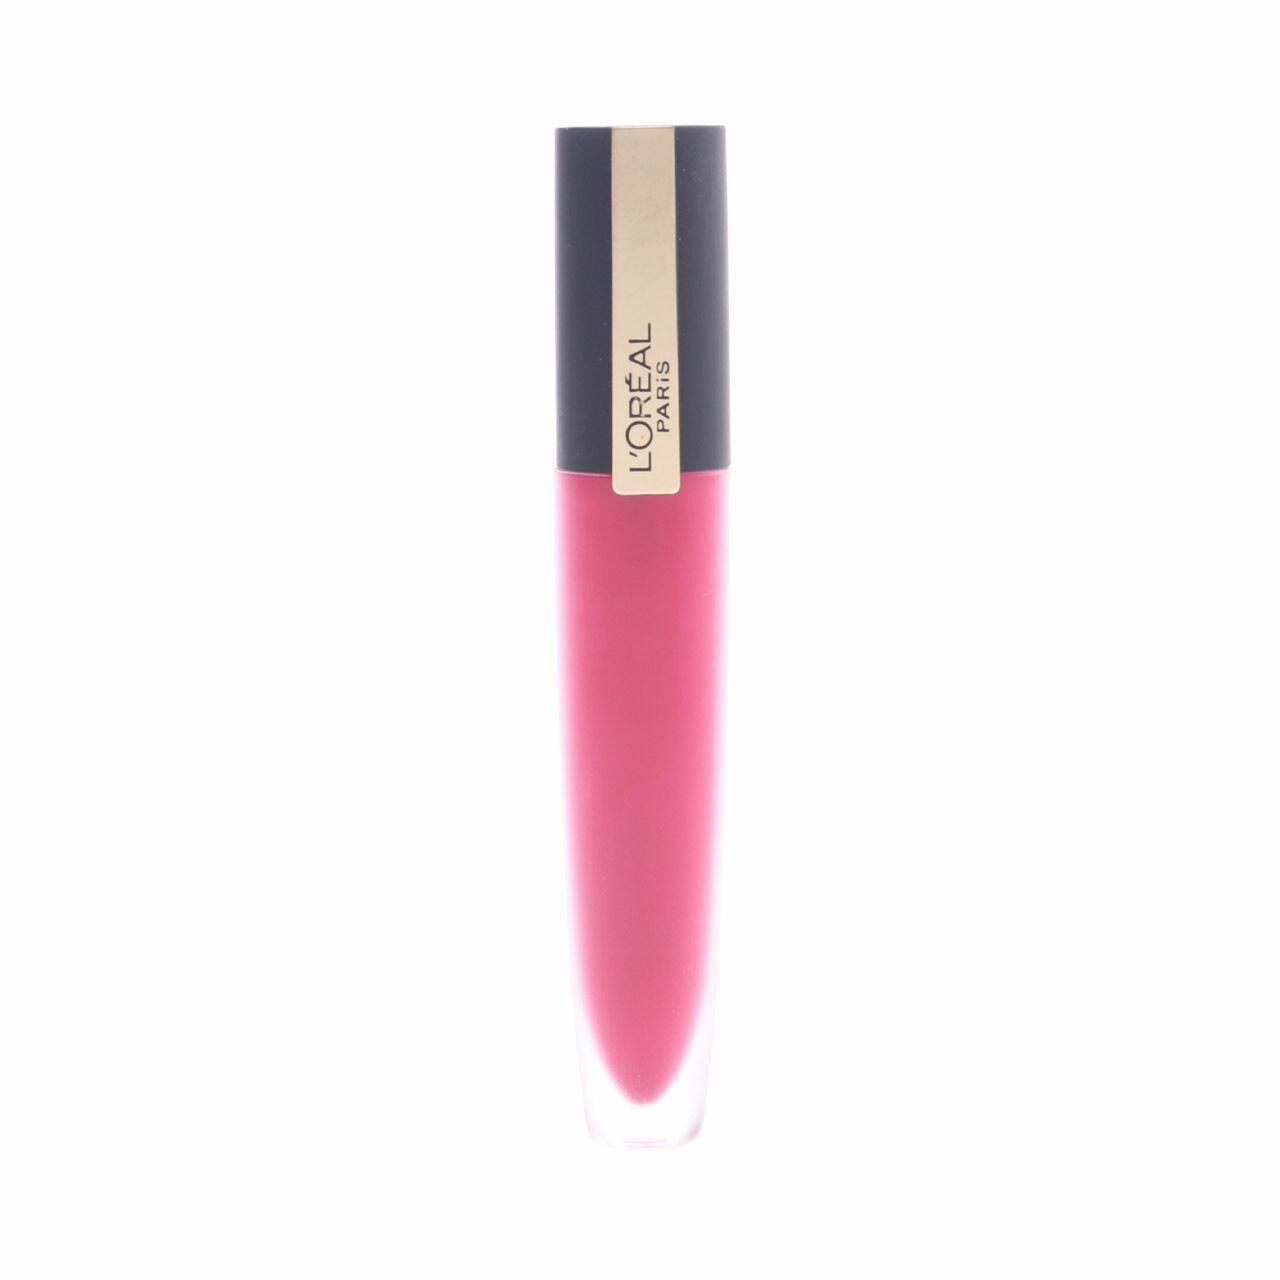 L'Oreal Rouge Signature Matte 140 Desired Lips